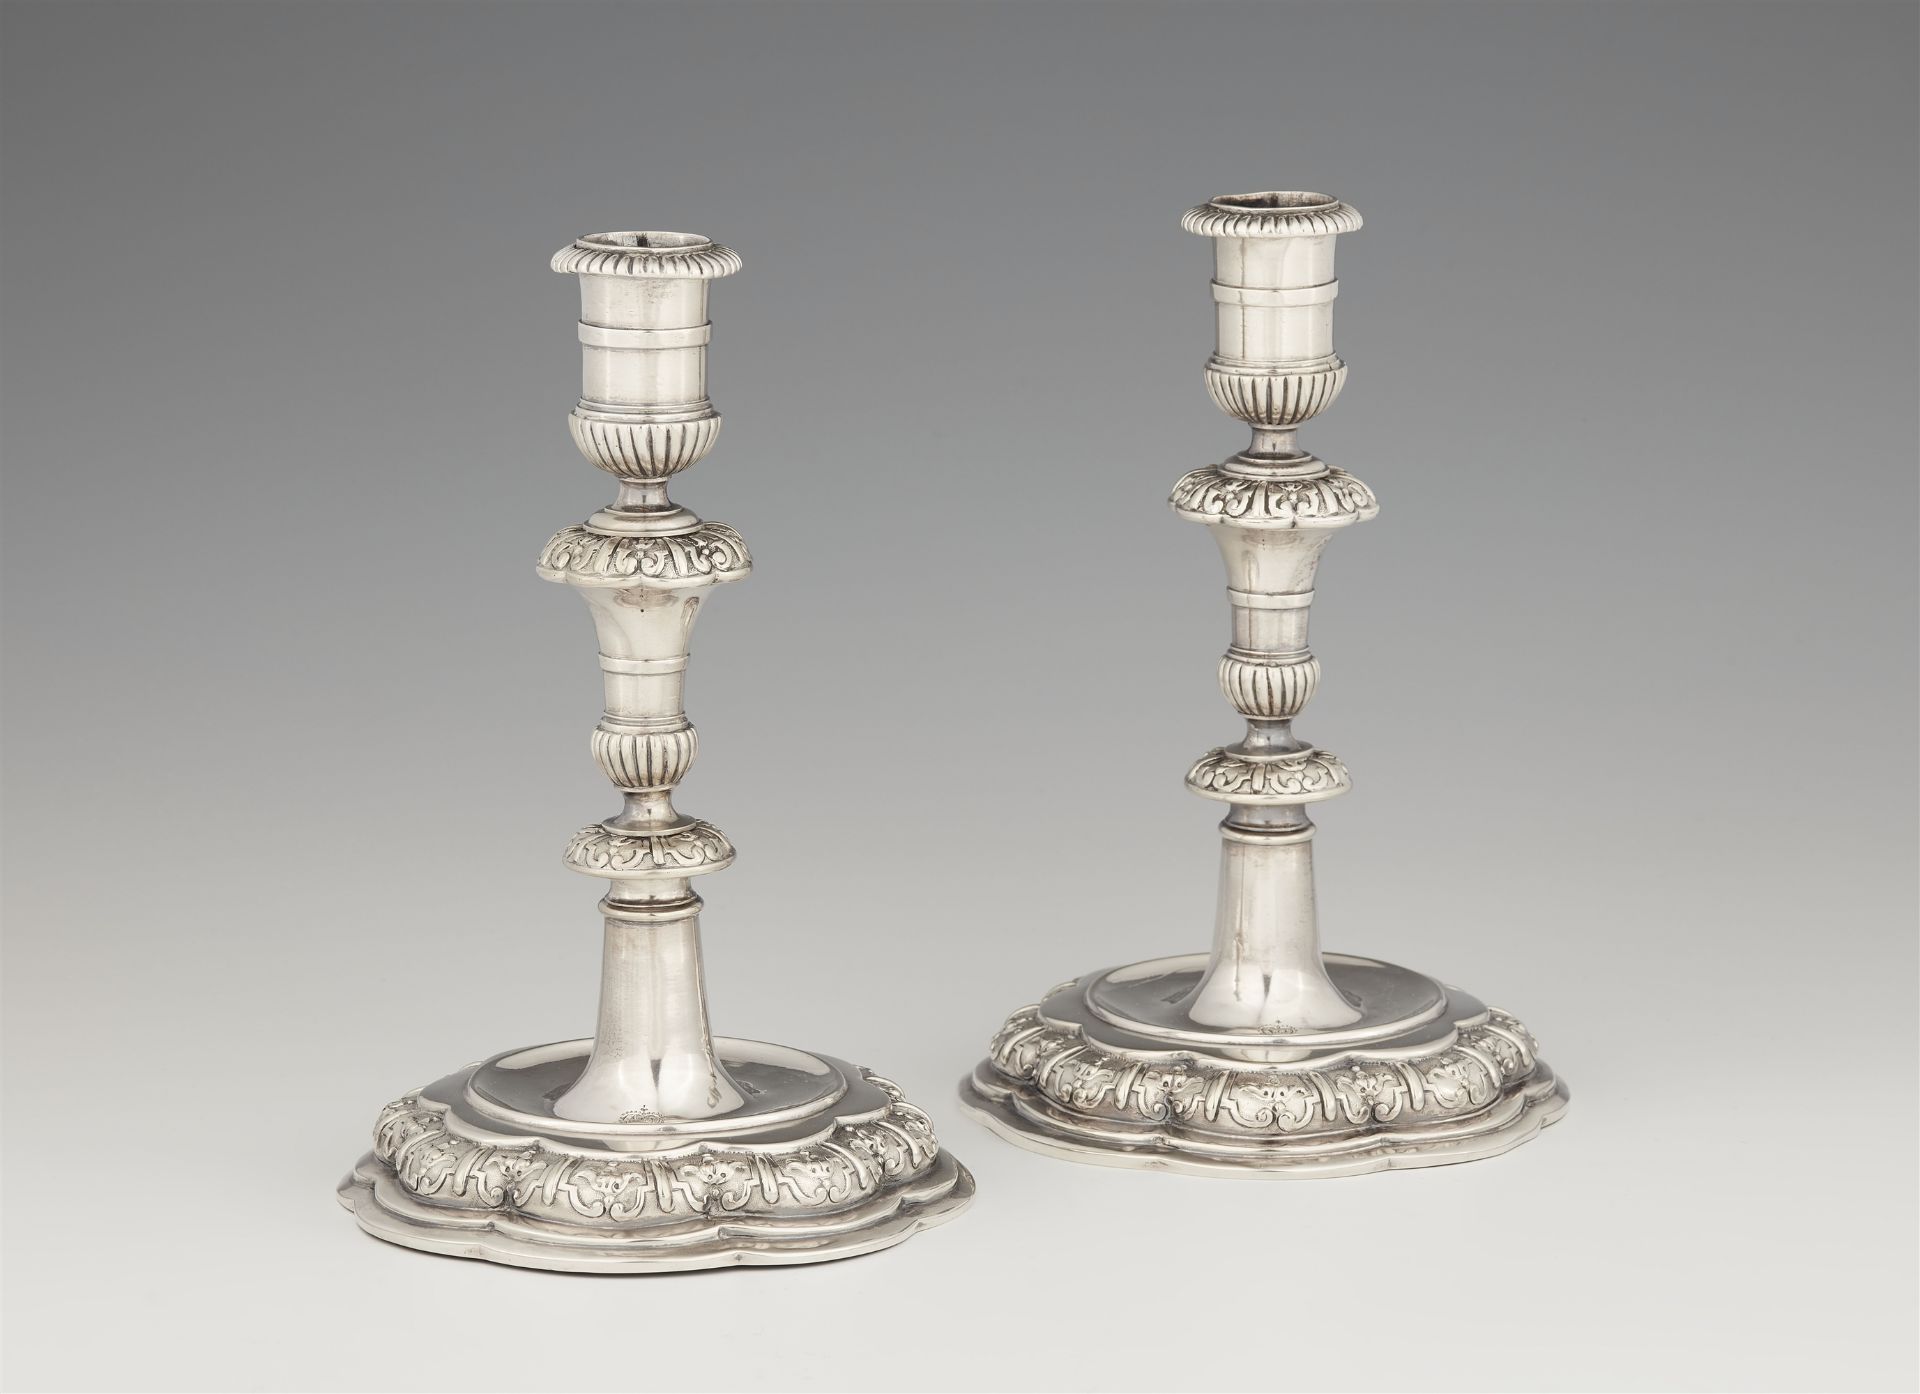 A pair of early Augsburg silver candlesticks